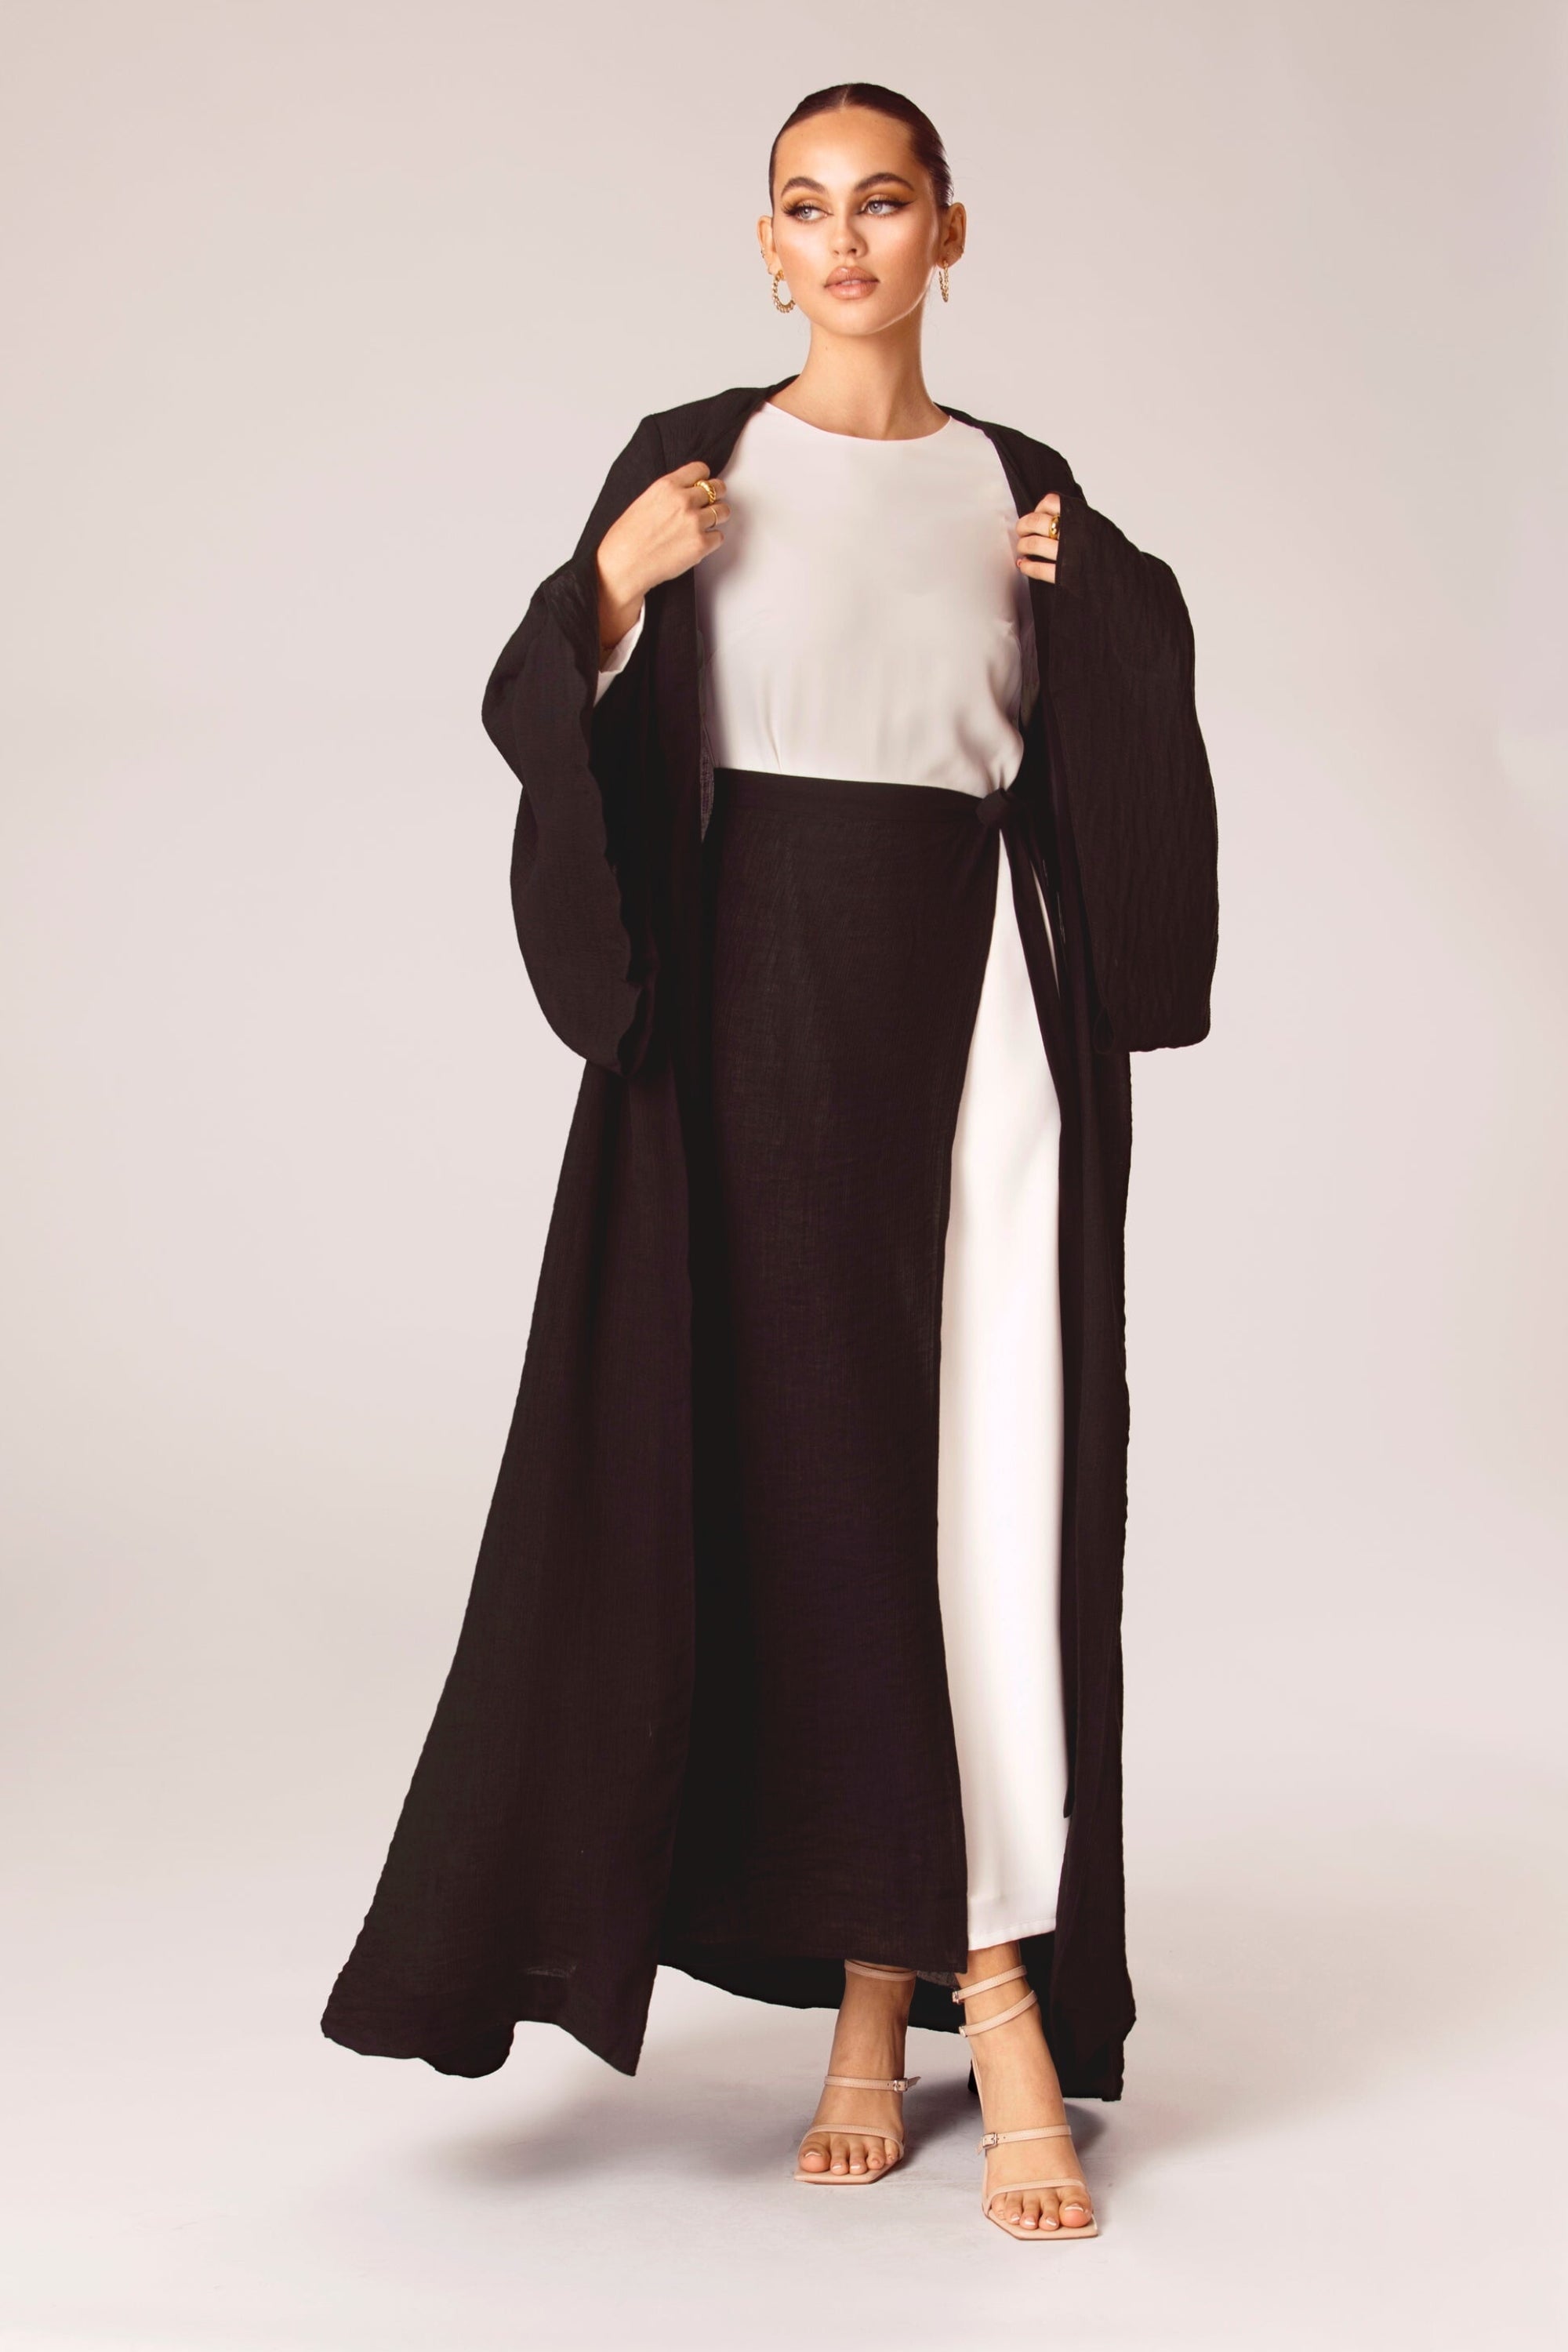 Rana Textured Open Abaya and Skirt Set - Espresso Clothing Veiled Collection 